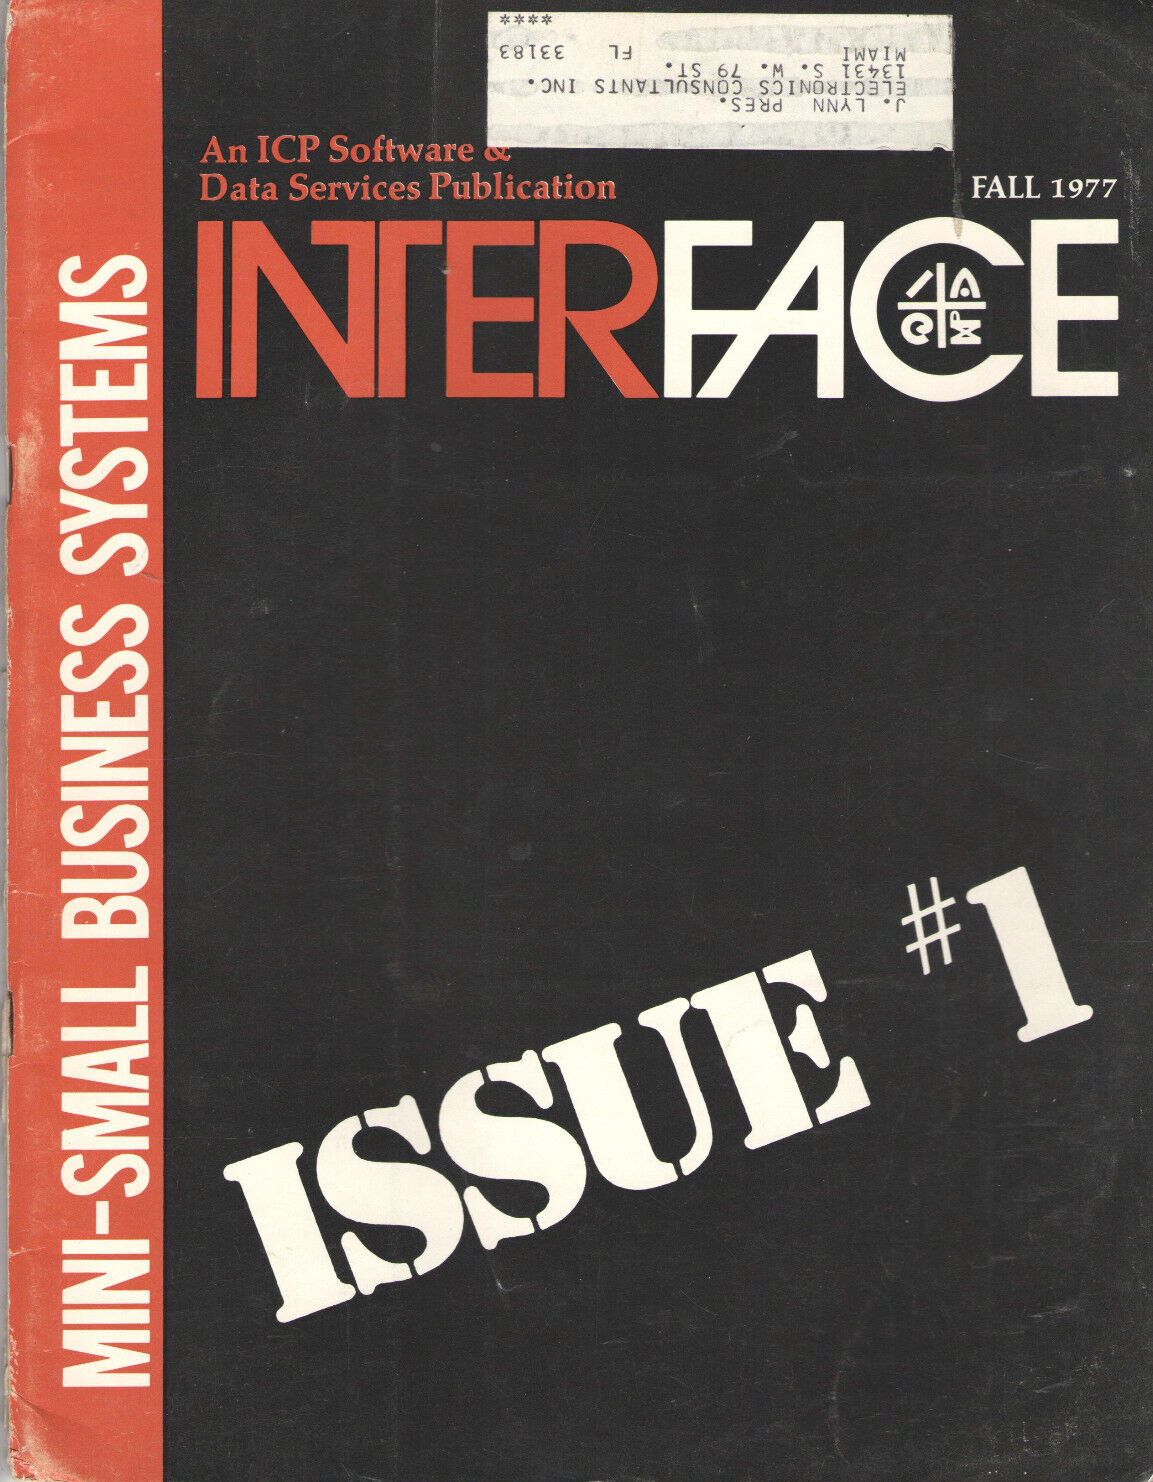 VINTAGE FALL 1977 VOL 1 ISSUE 1 INTERFACE MAGAZINE MINI-SMALL BUSINESS SYSTEMS